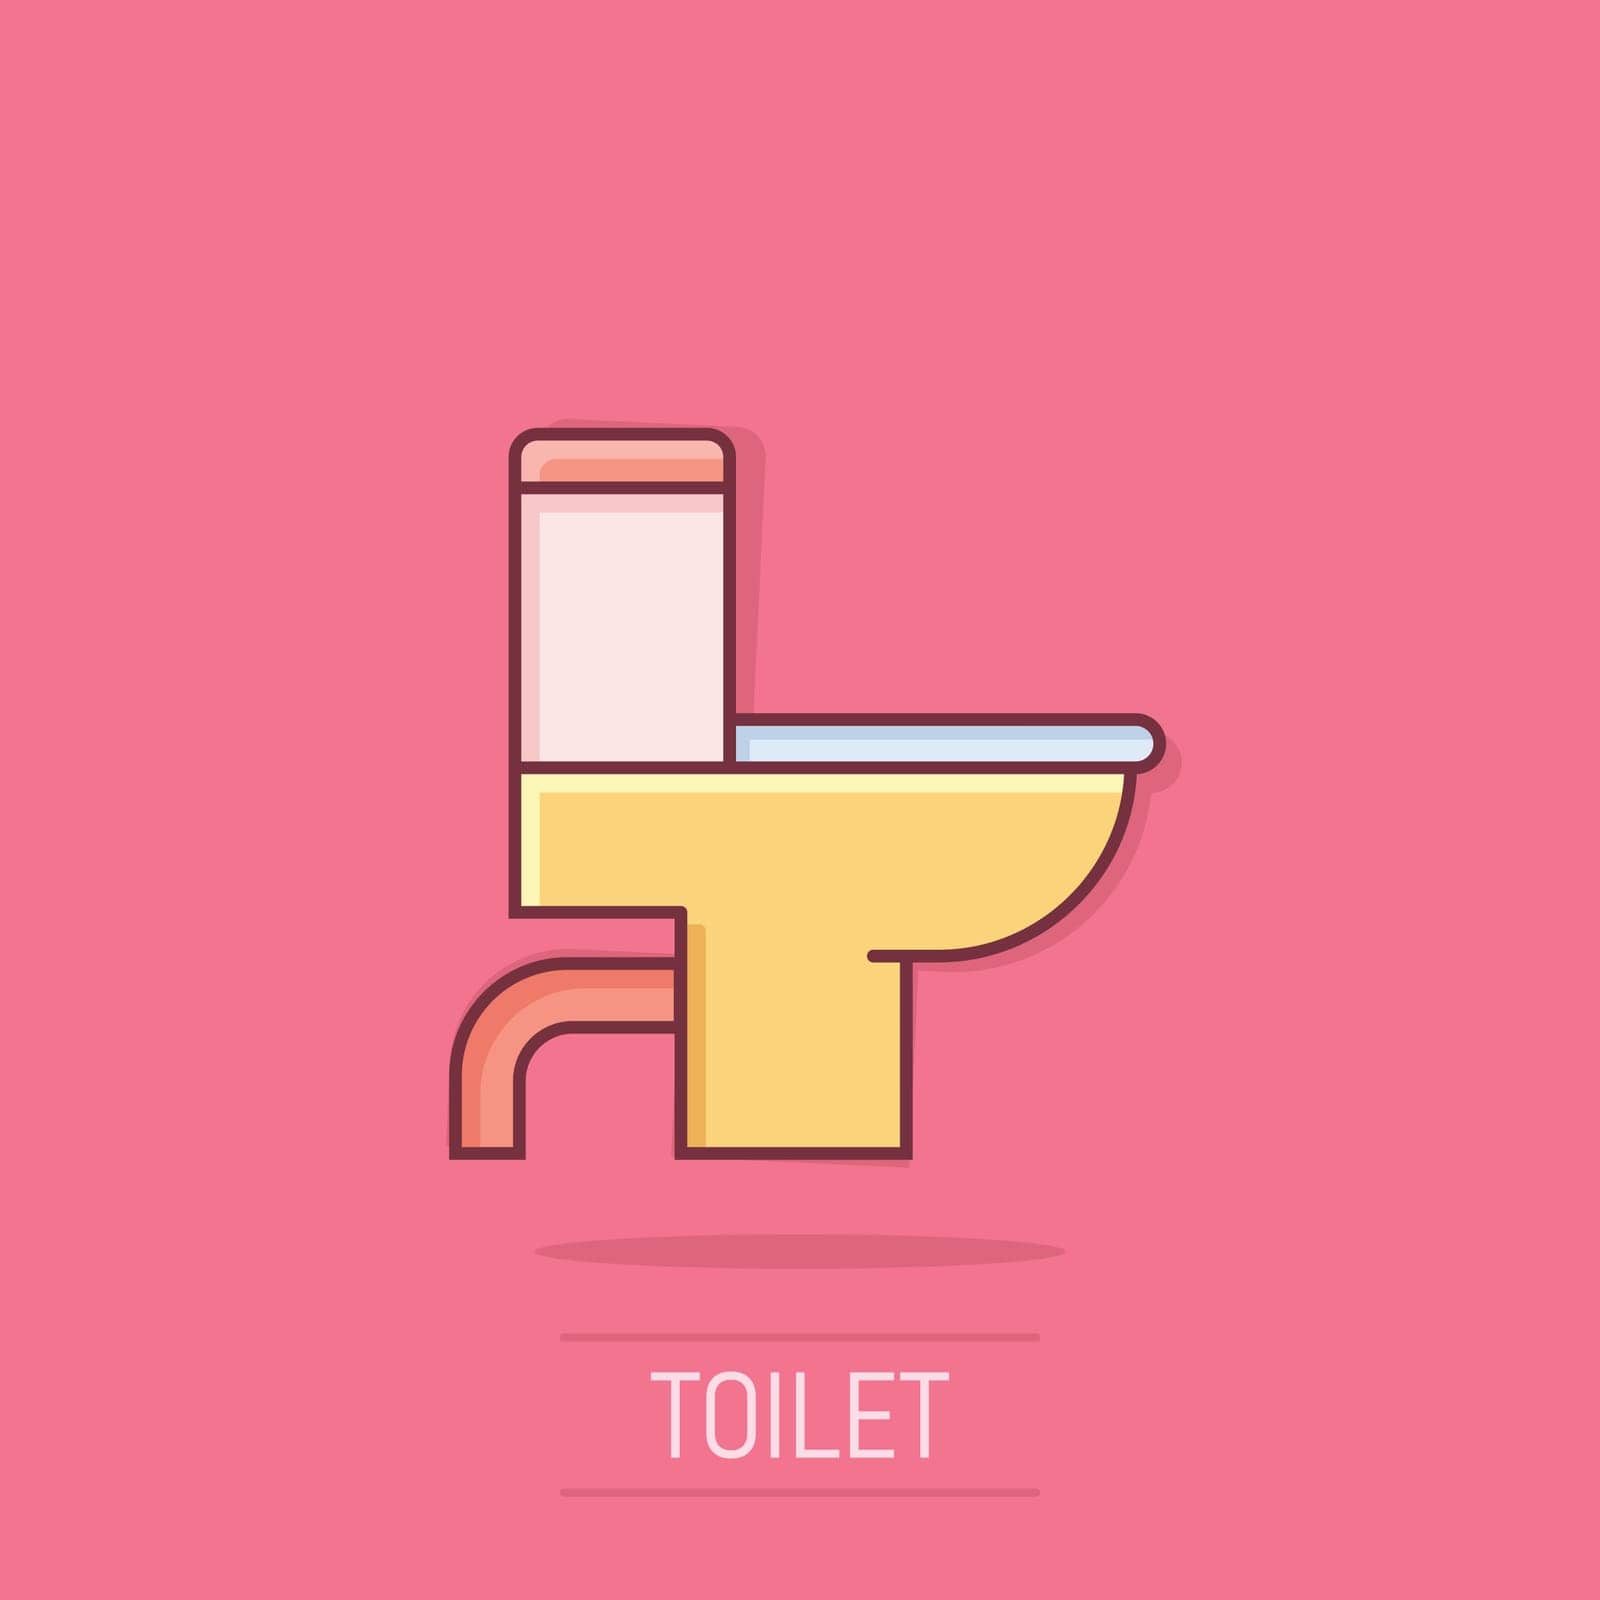 Toilet bowl icon in comic style. Hygiene cartoon vector illustration on isolated background. WC restroom splash effect sign business concept. by LysenkoA